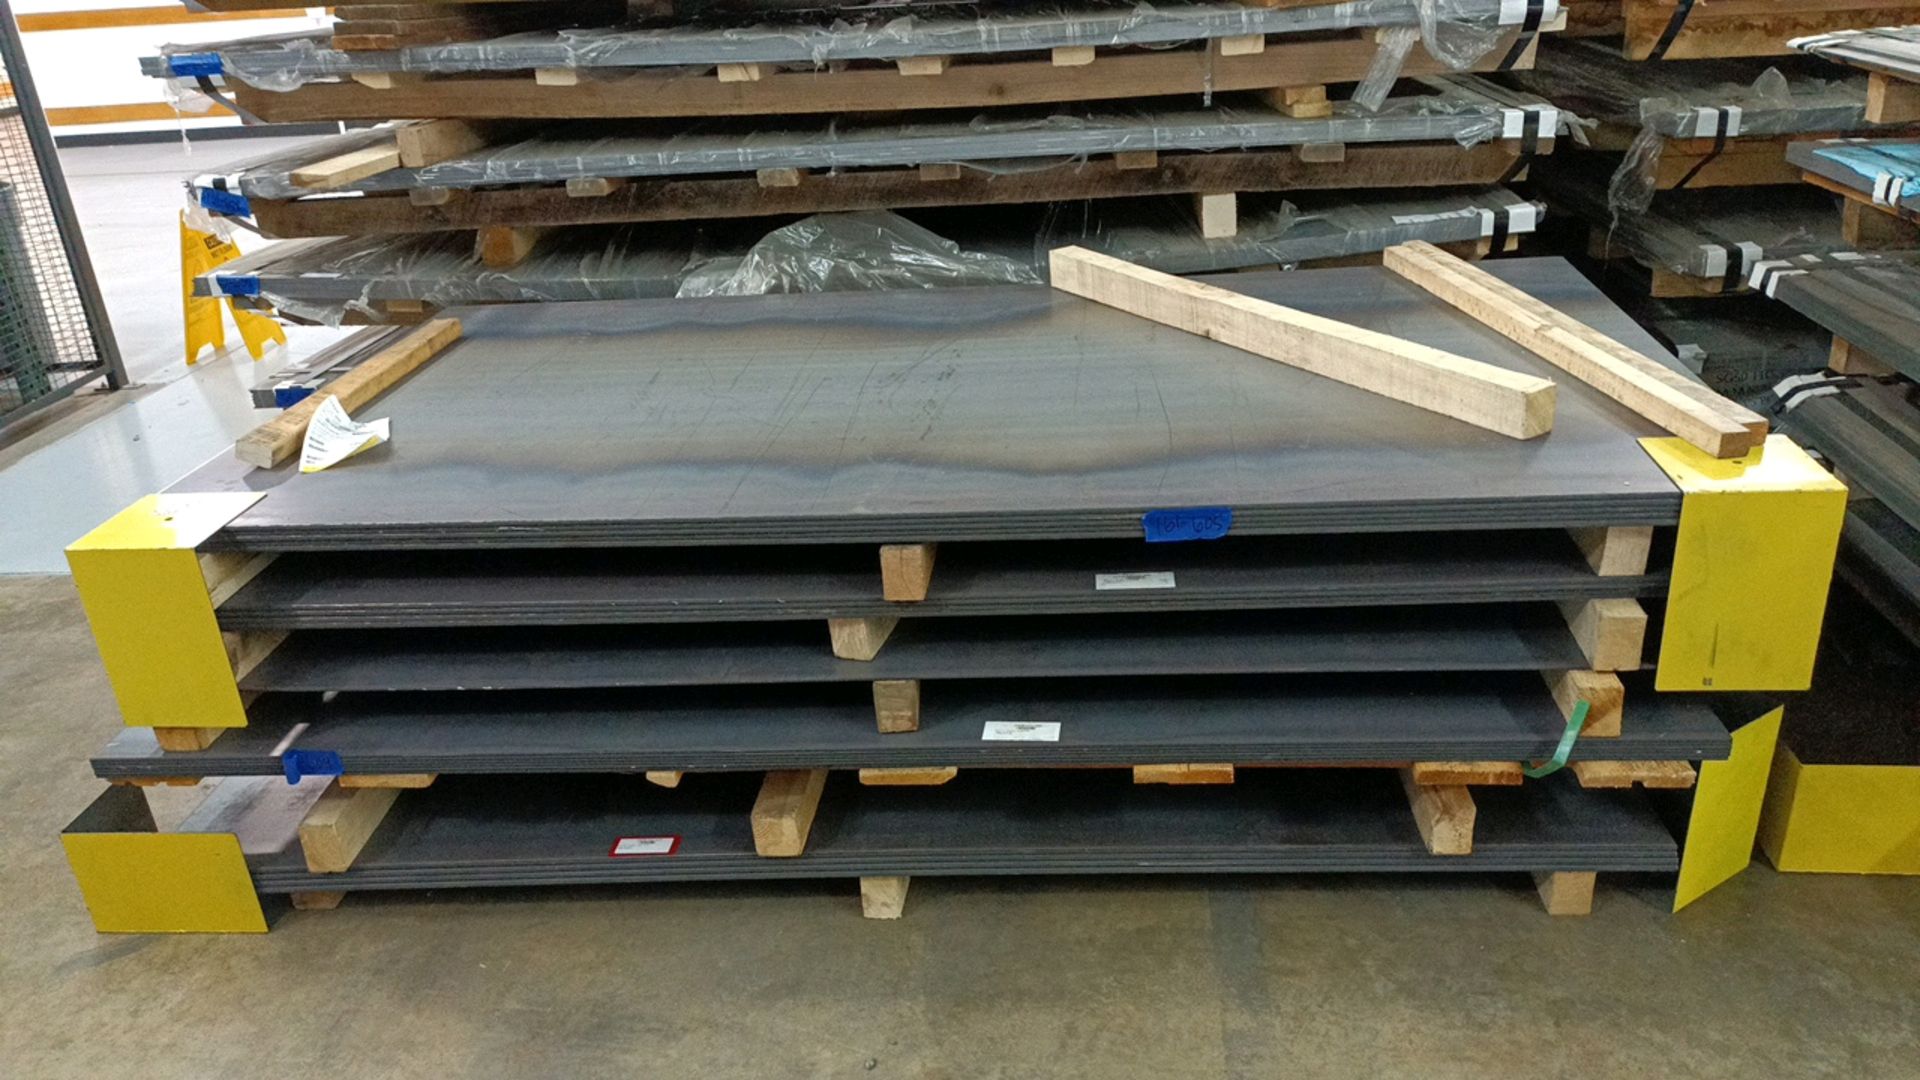 Assorted Size Steel Sheets and Bar Stock - Image 2 of 11